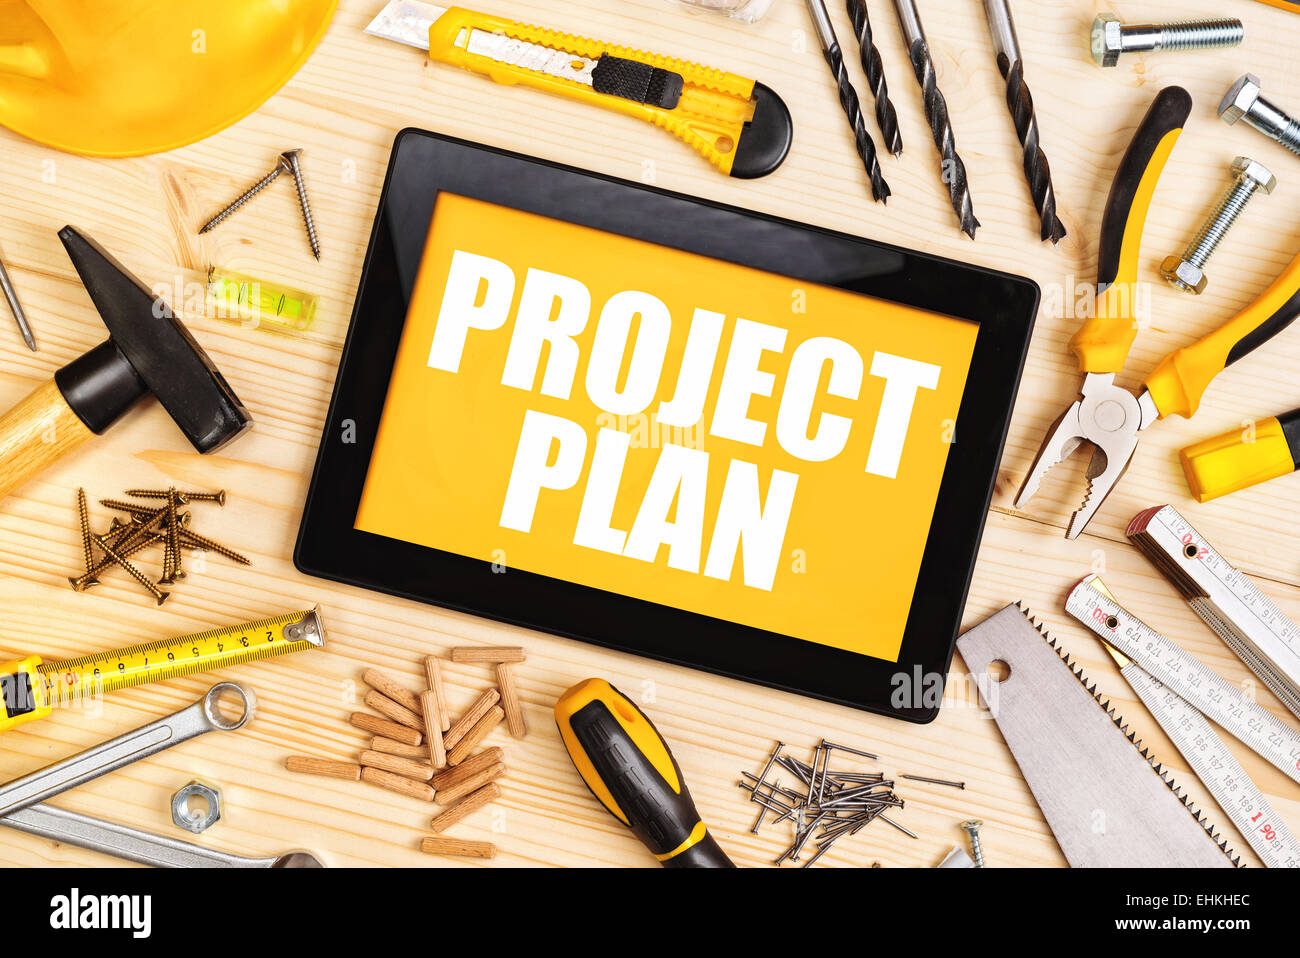 Project Plan For Home Redecoration Work with Digital Tablet and Assorted Woodwork and Carpentry Tools on Workshop Table Stock Photo